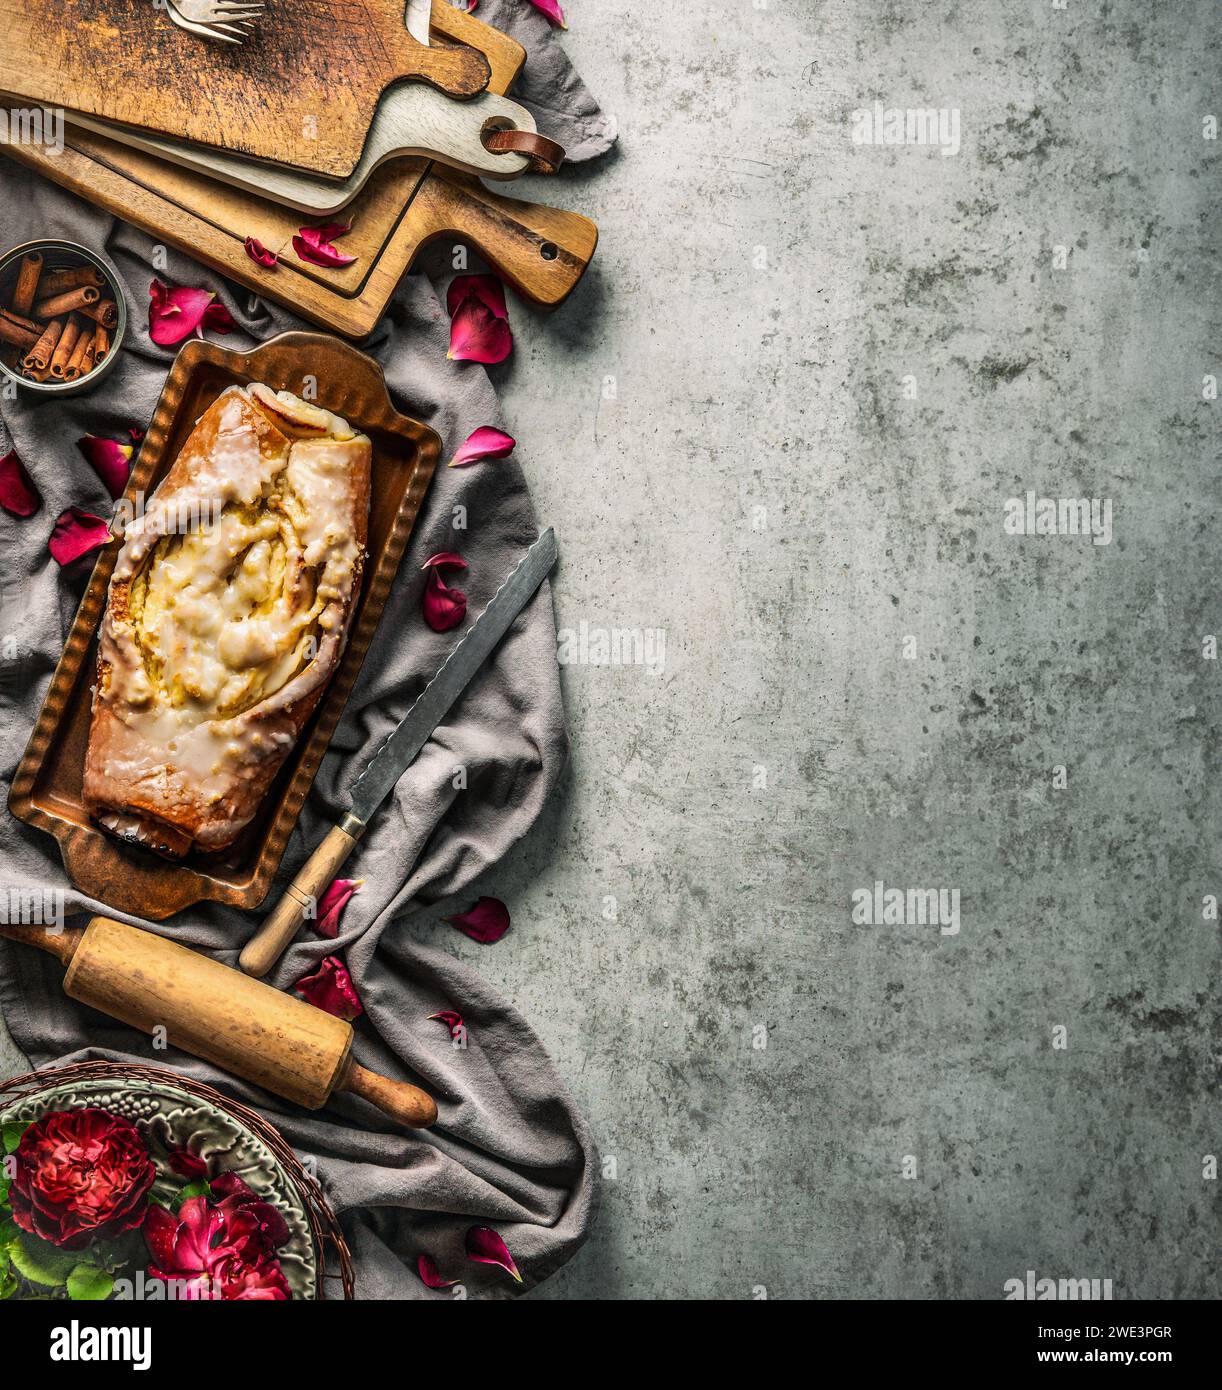 Baking background with cake, flowers and vintage kitchen bake utensils on rustic background, top view with copy space Stock Photo